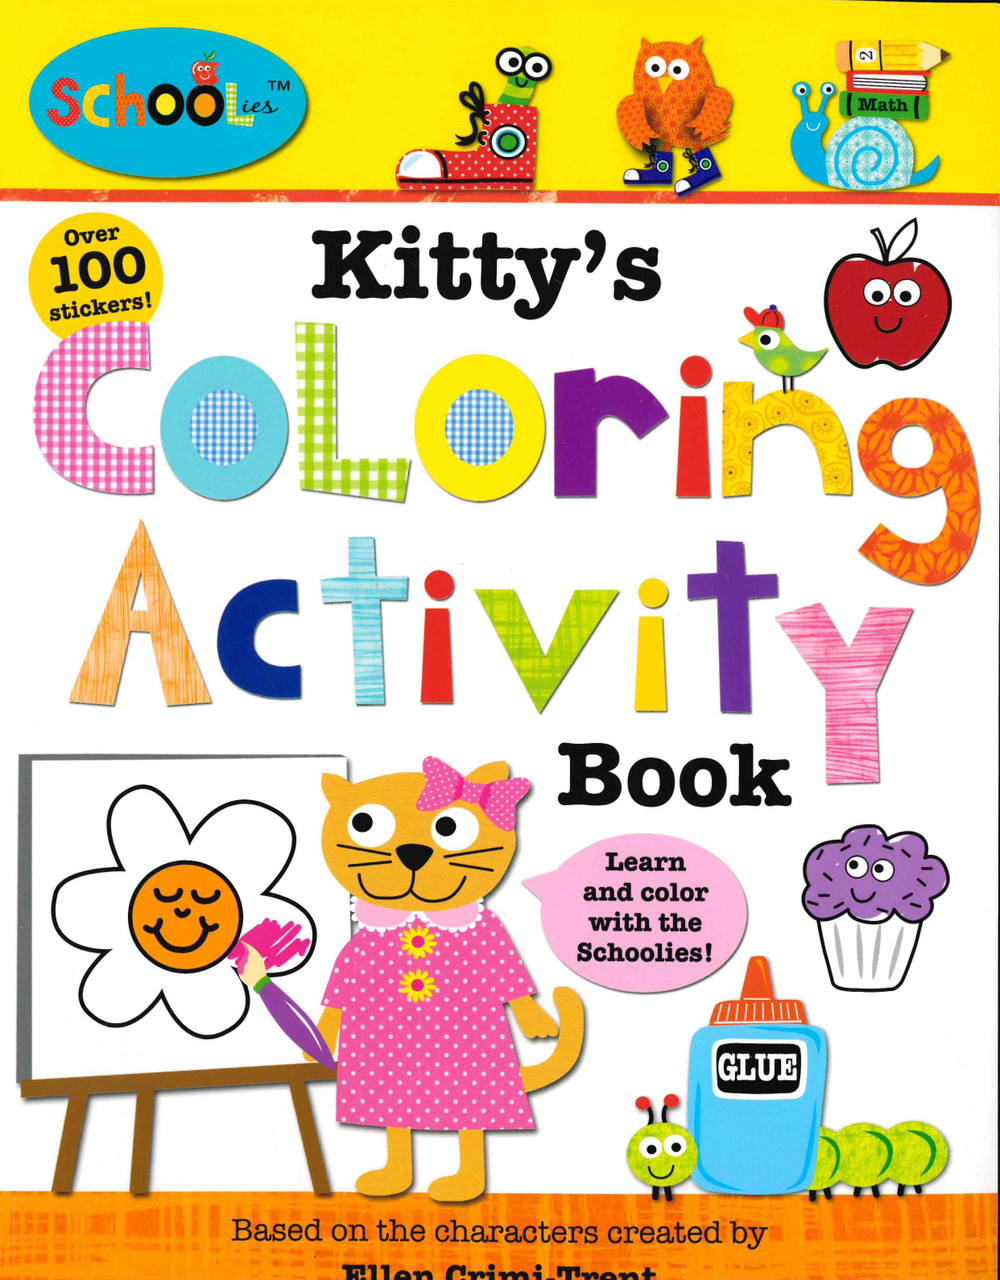 https://cdn11.bigcommerce.com/s-0f1b1/images/stencil/1280x1280/products/11968/89852/Y0769_Schoolies_Kittys_Coloring_Activity_Book_Front__13027.1635441982.jpg?c=2